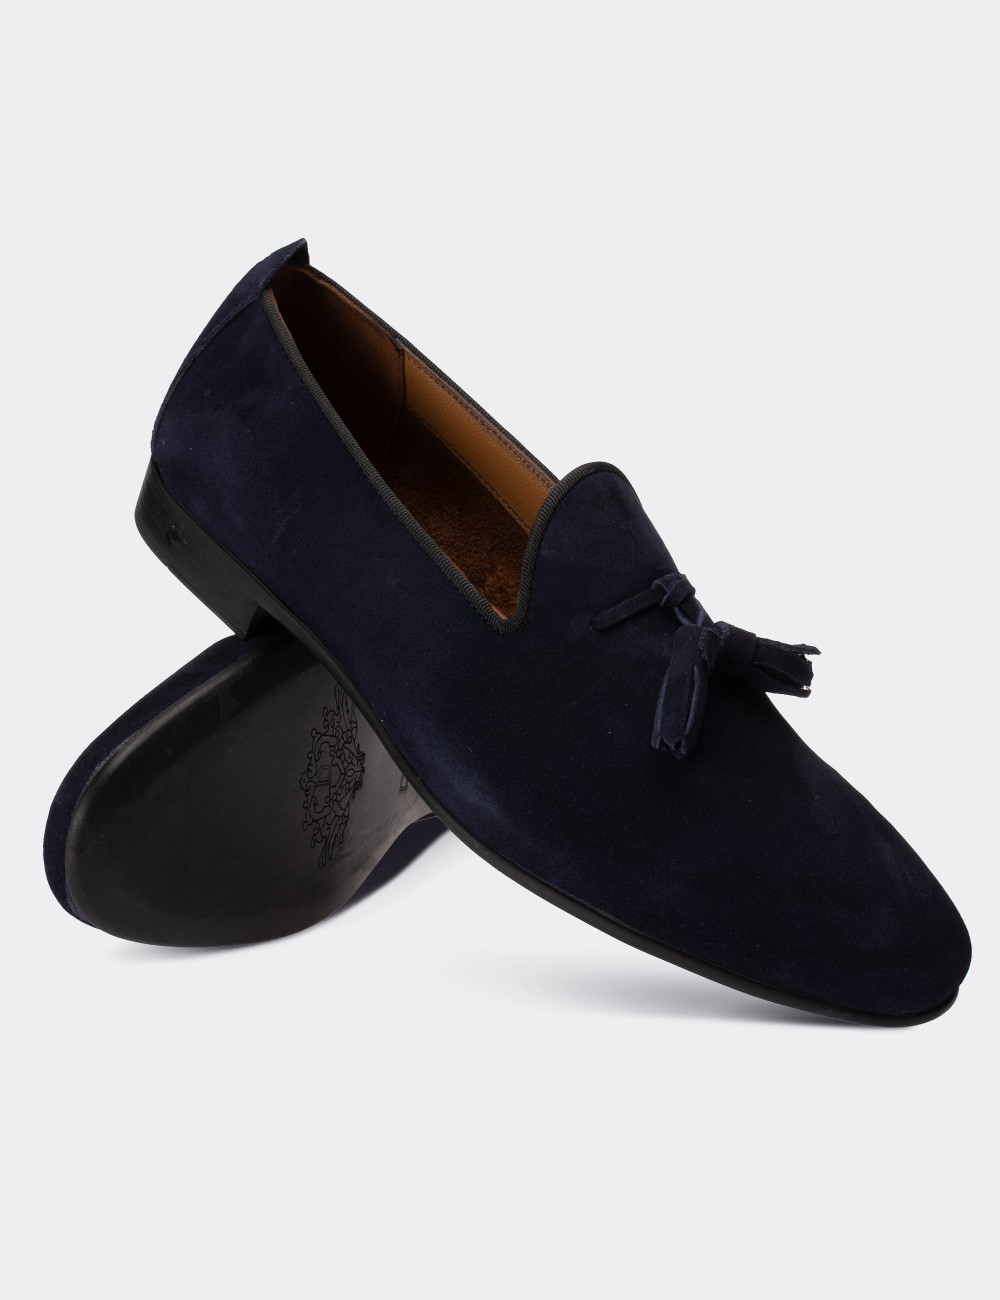 Navy Suede Leather Loafers - 01702MLCVC03